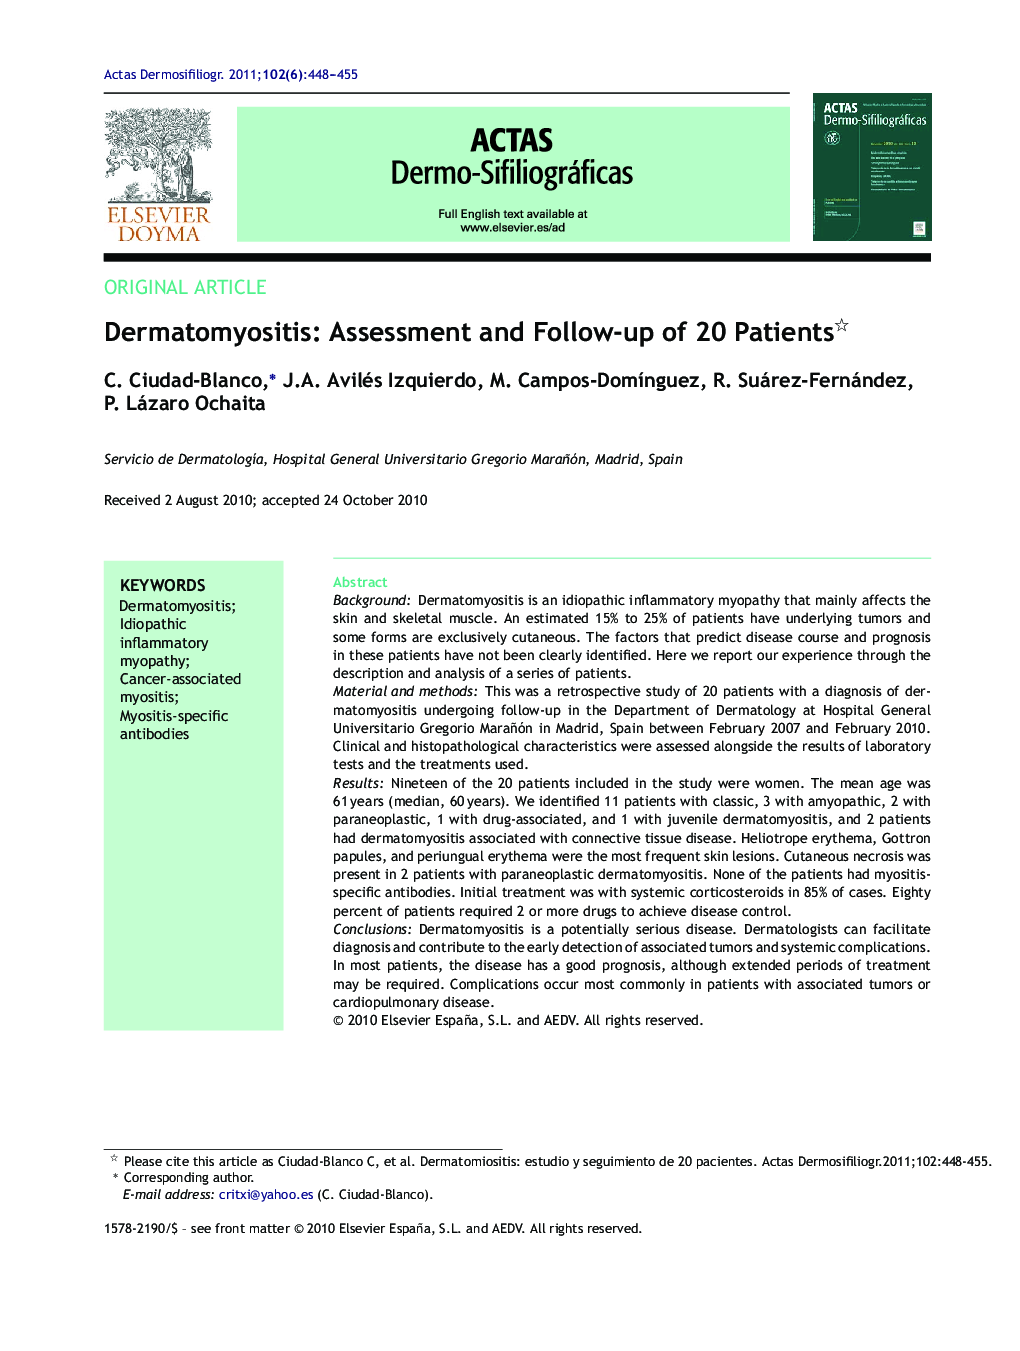 Dermatomyositis: Assessment and Follow-up of 20 Patients 